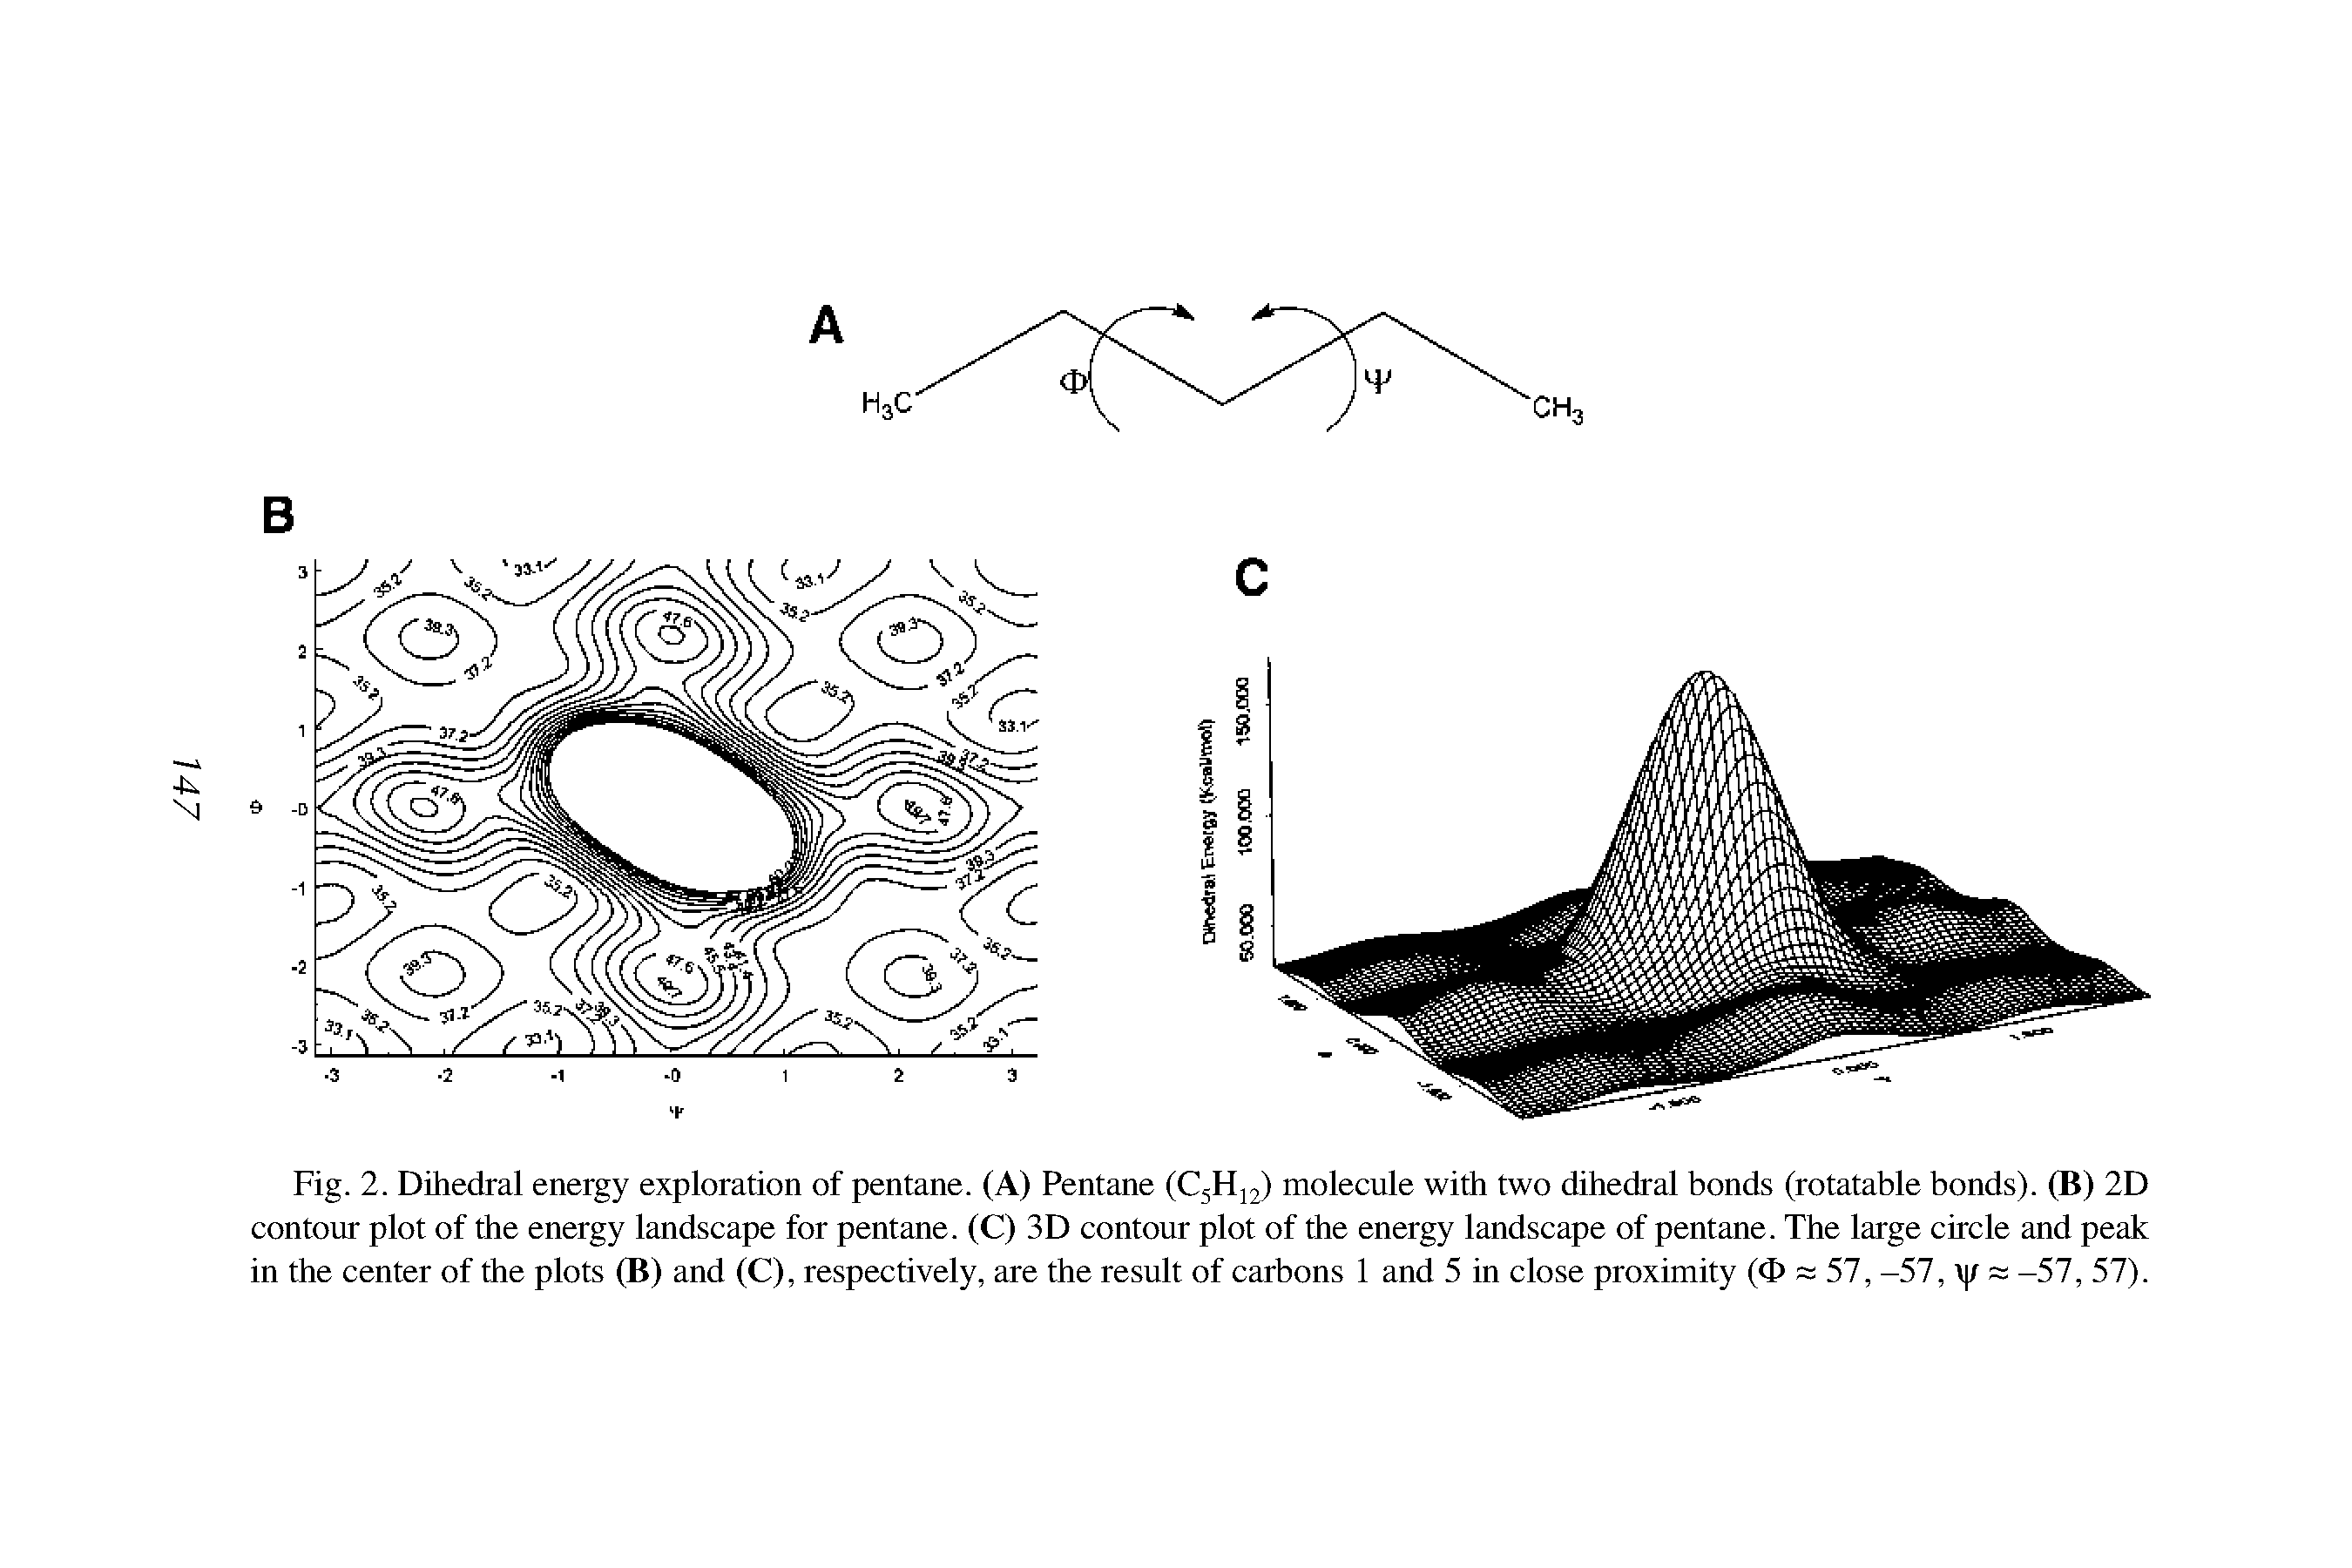 Fig. 2. Dihedral energy exploration of pentane. (A) Pentane (C5H12) molecule with two dihedral bonds (rotatable bonds). (B) 2D contour plot of the energy landscape for pentane. (C) 3D contour plot of the energy landscape of pentane. The large circle and peak in the center of the plots (B) and (C), respectively, are the result of carbons 1 and 5 in close proximity (<E> = 57, -57, / = -57, 57).